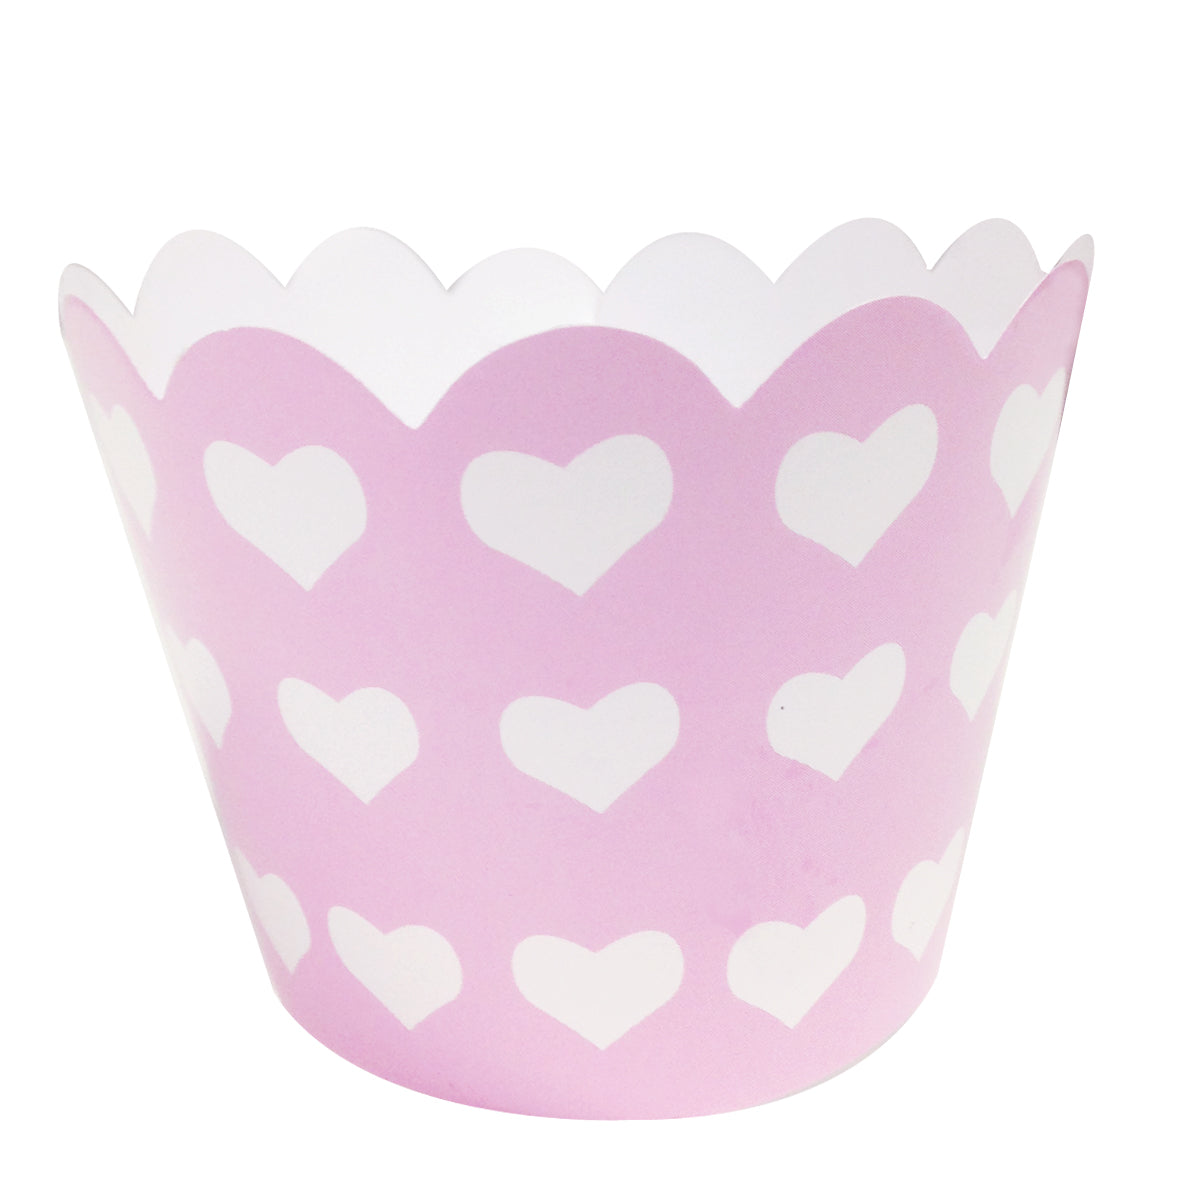 Wrapables Hearts Cupcake Wrappers, Standard, Pink, Set of 20